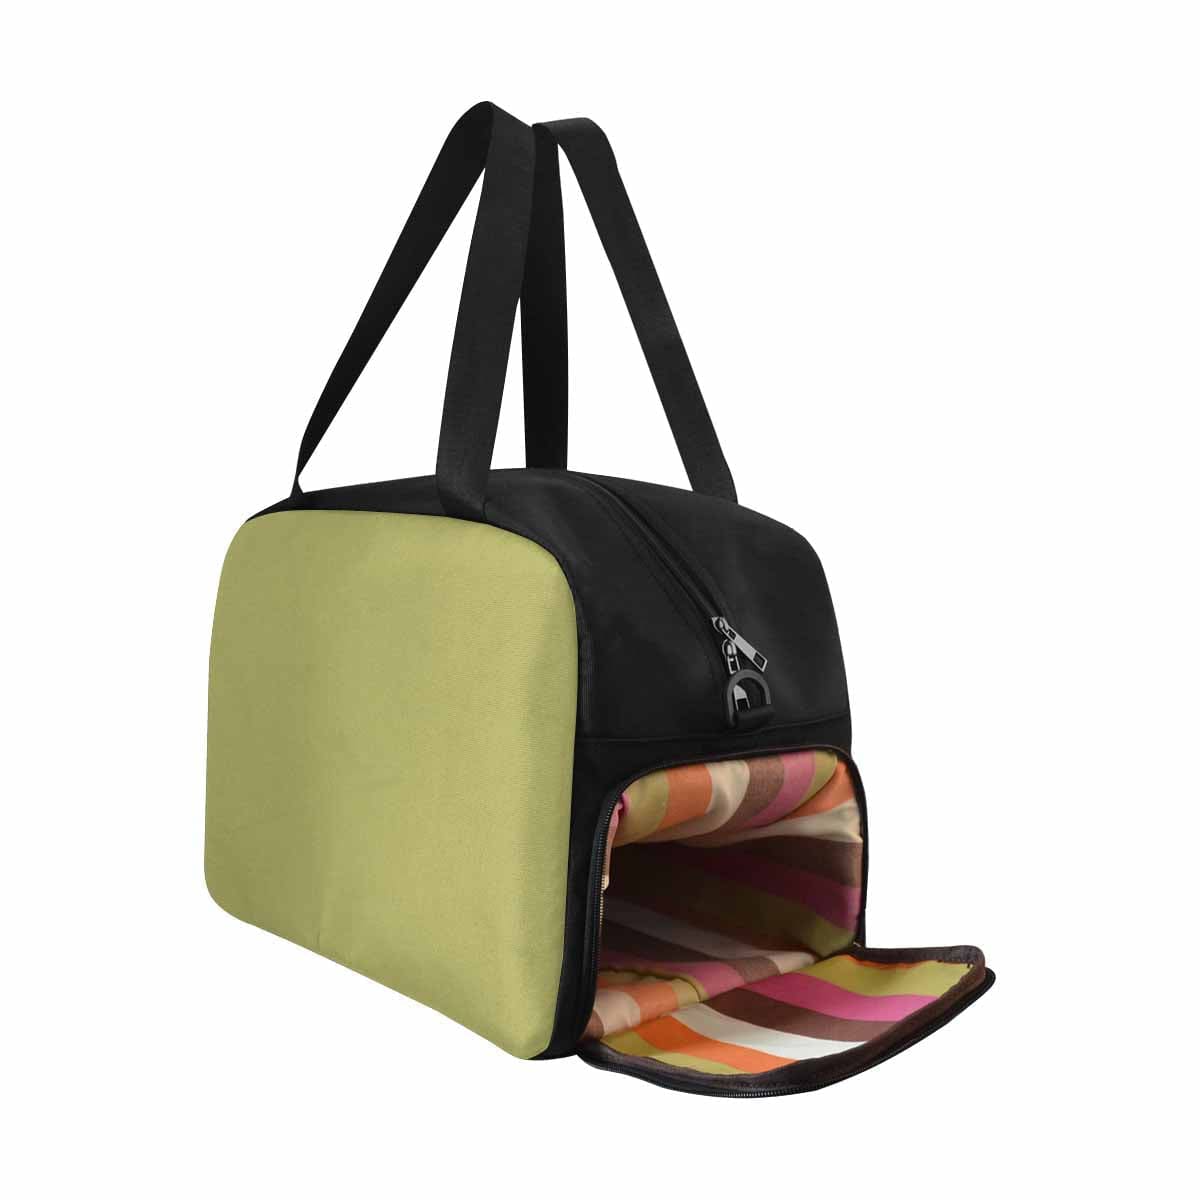 Olive Green Tote And Crossbody Travel Bag - Bags | Travel Bags | Crossbody